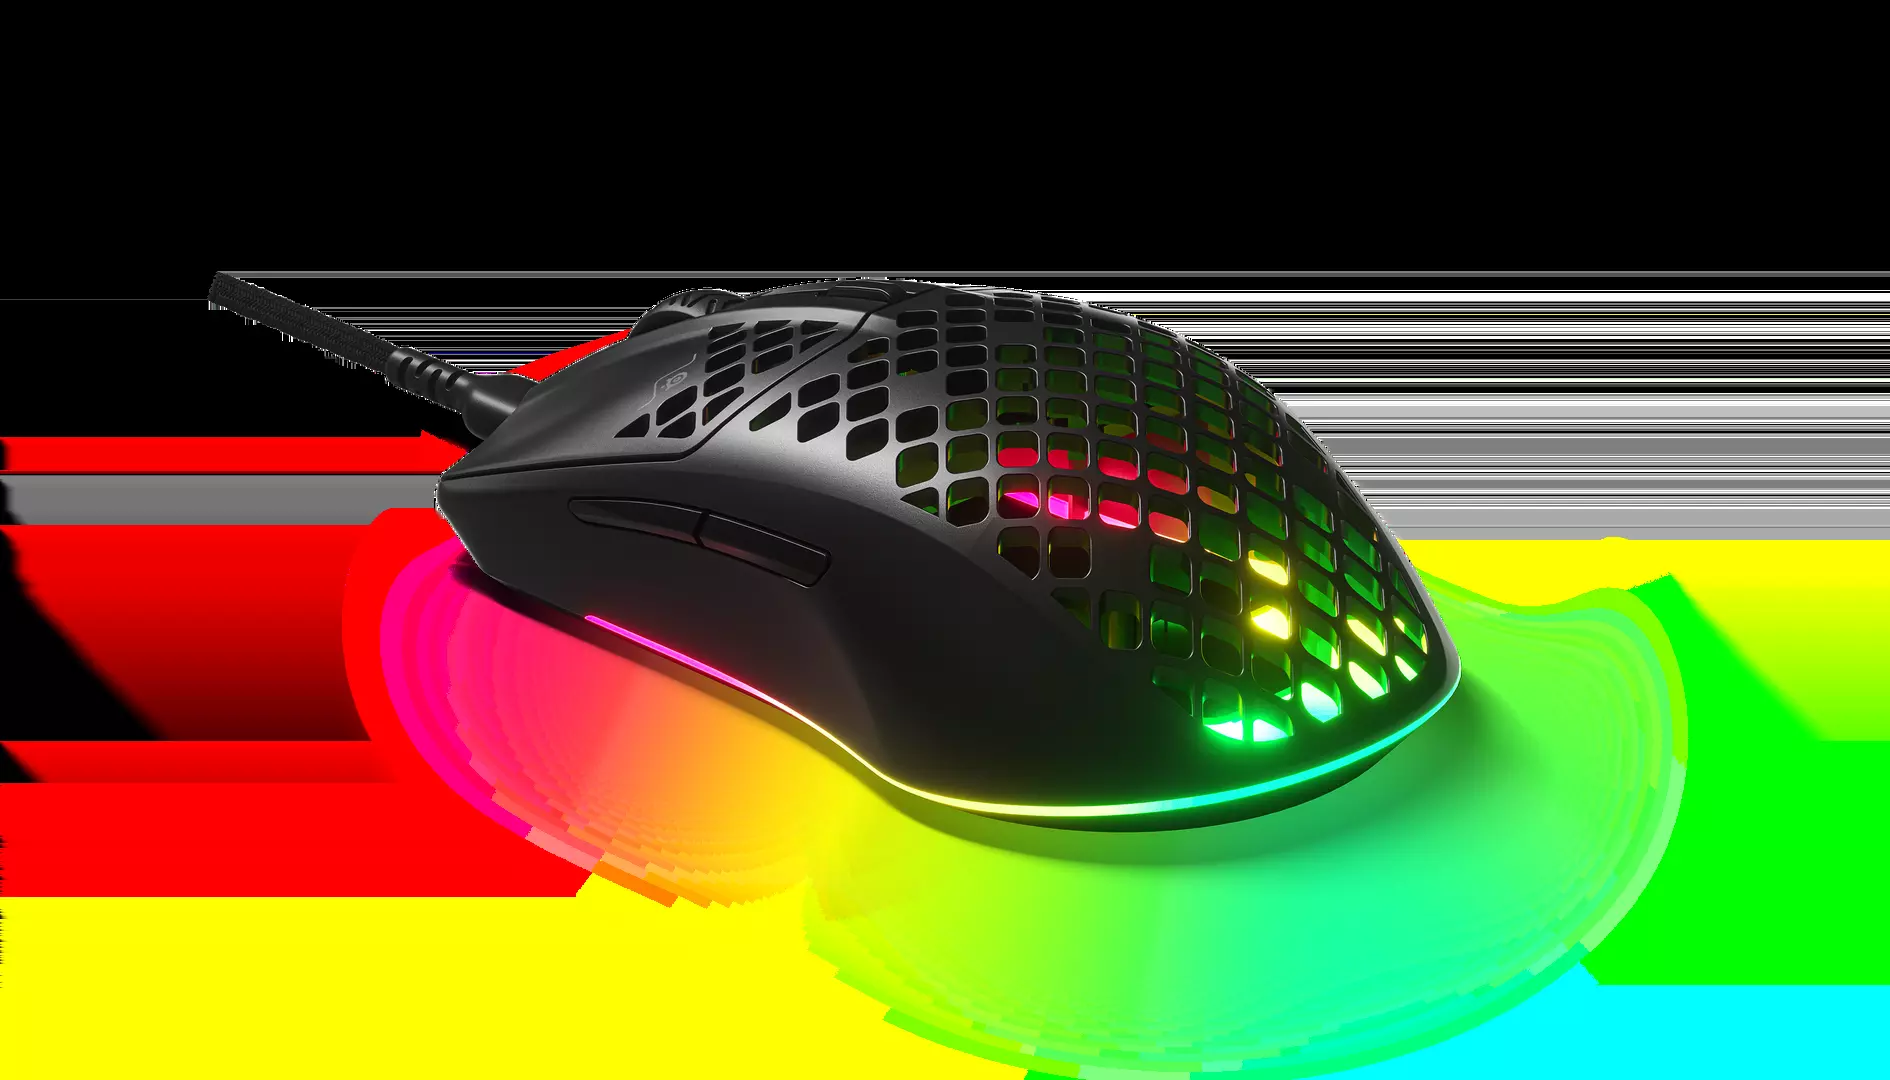 Steelseries Aerox Gaming Mouse